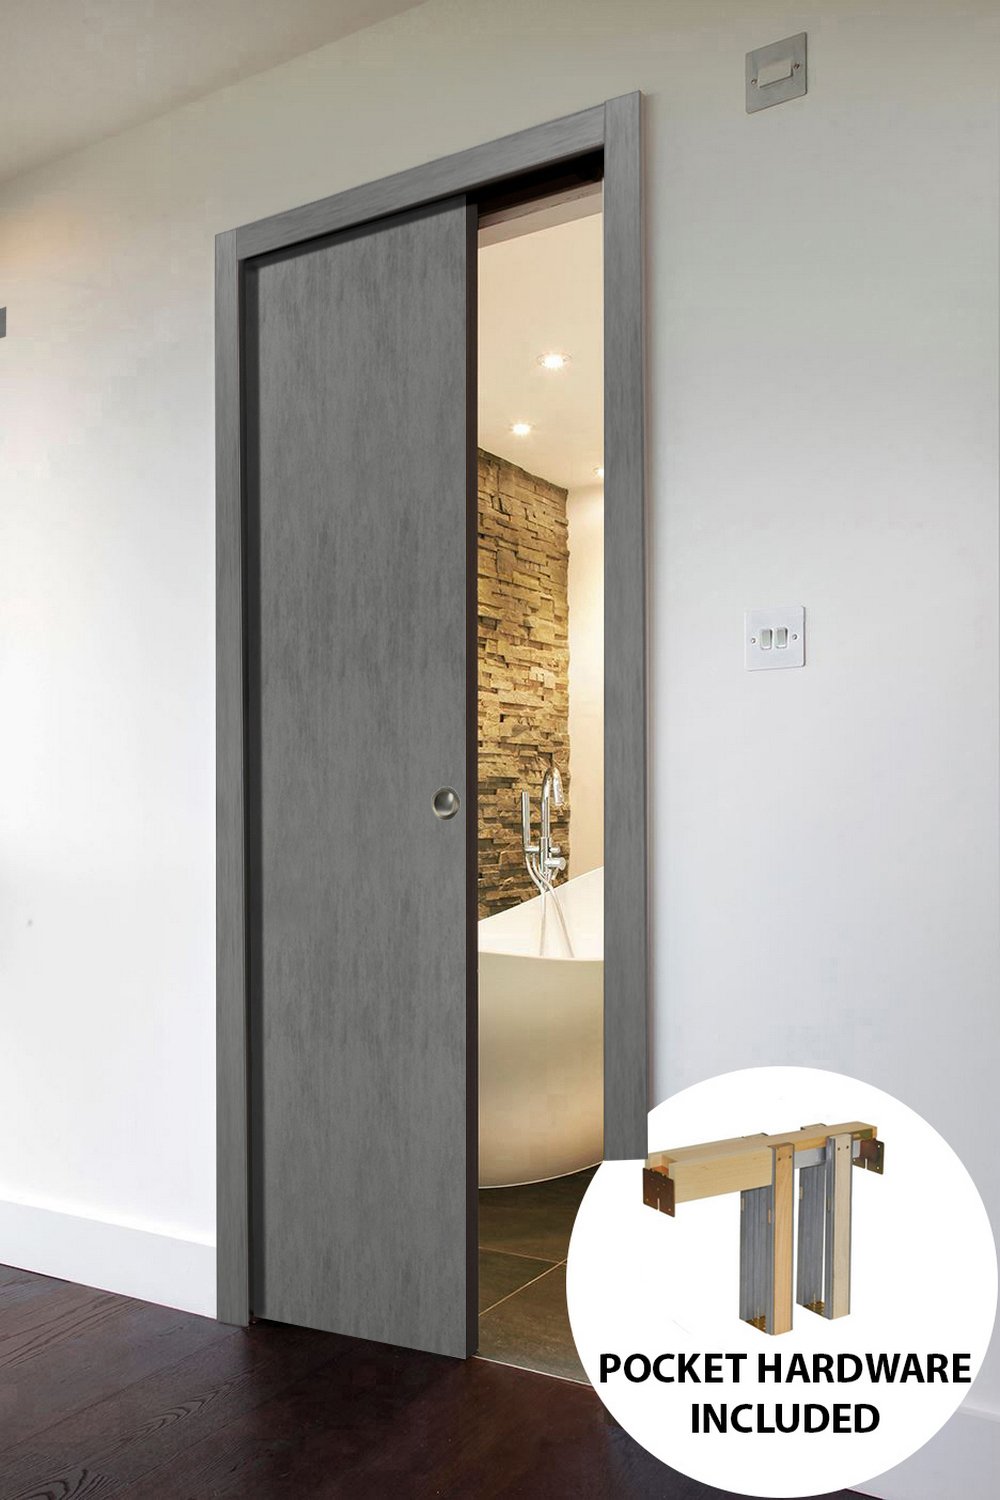 Sliding French Pocket Door 24 x 80 inches with | Planum 0010 Concrete | Kit Trims Rail Hardware | Solid Wood Interior Bedroom Sturdy Doors - image 2 of 3